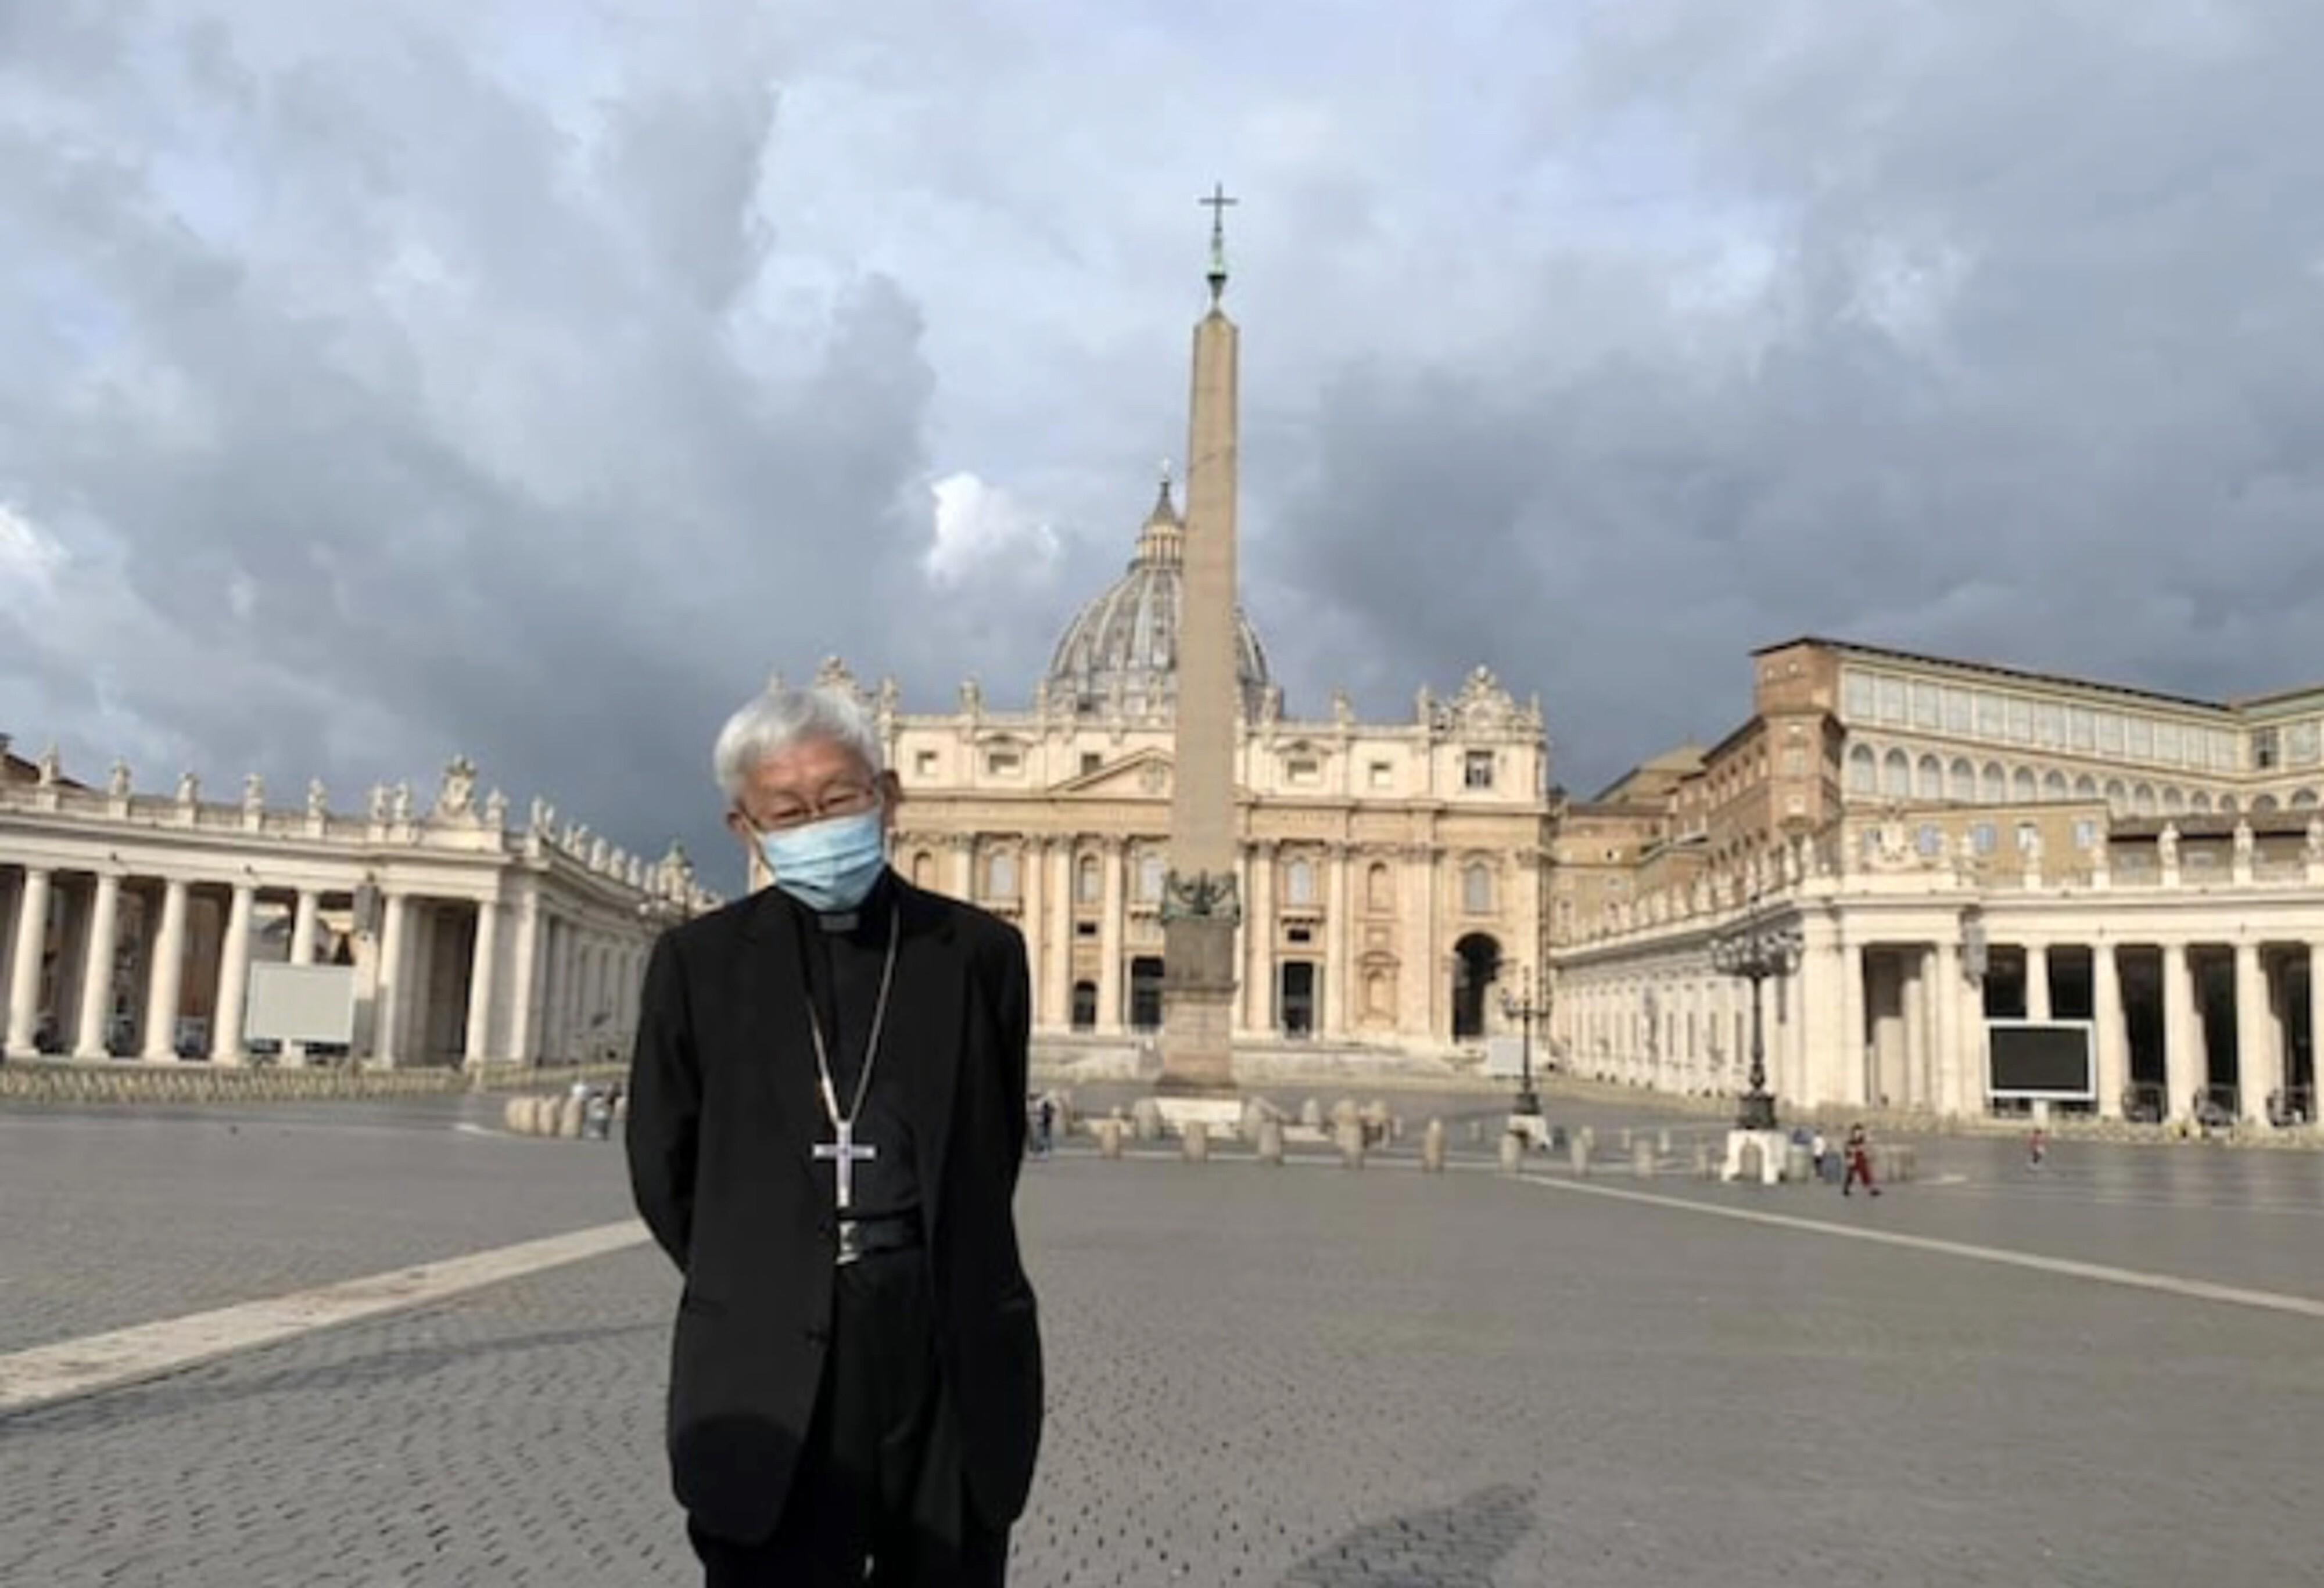 Cardinal Joseph Zen also visited Rome in September but was unable to meet the Pope. Photo: Handout